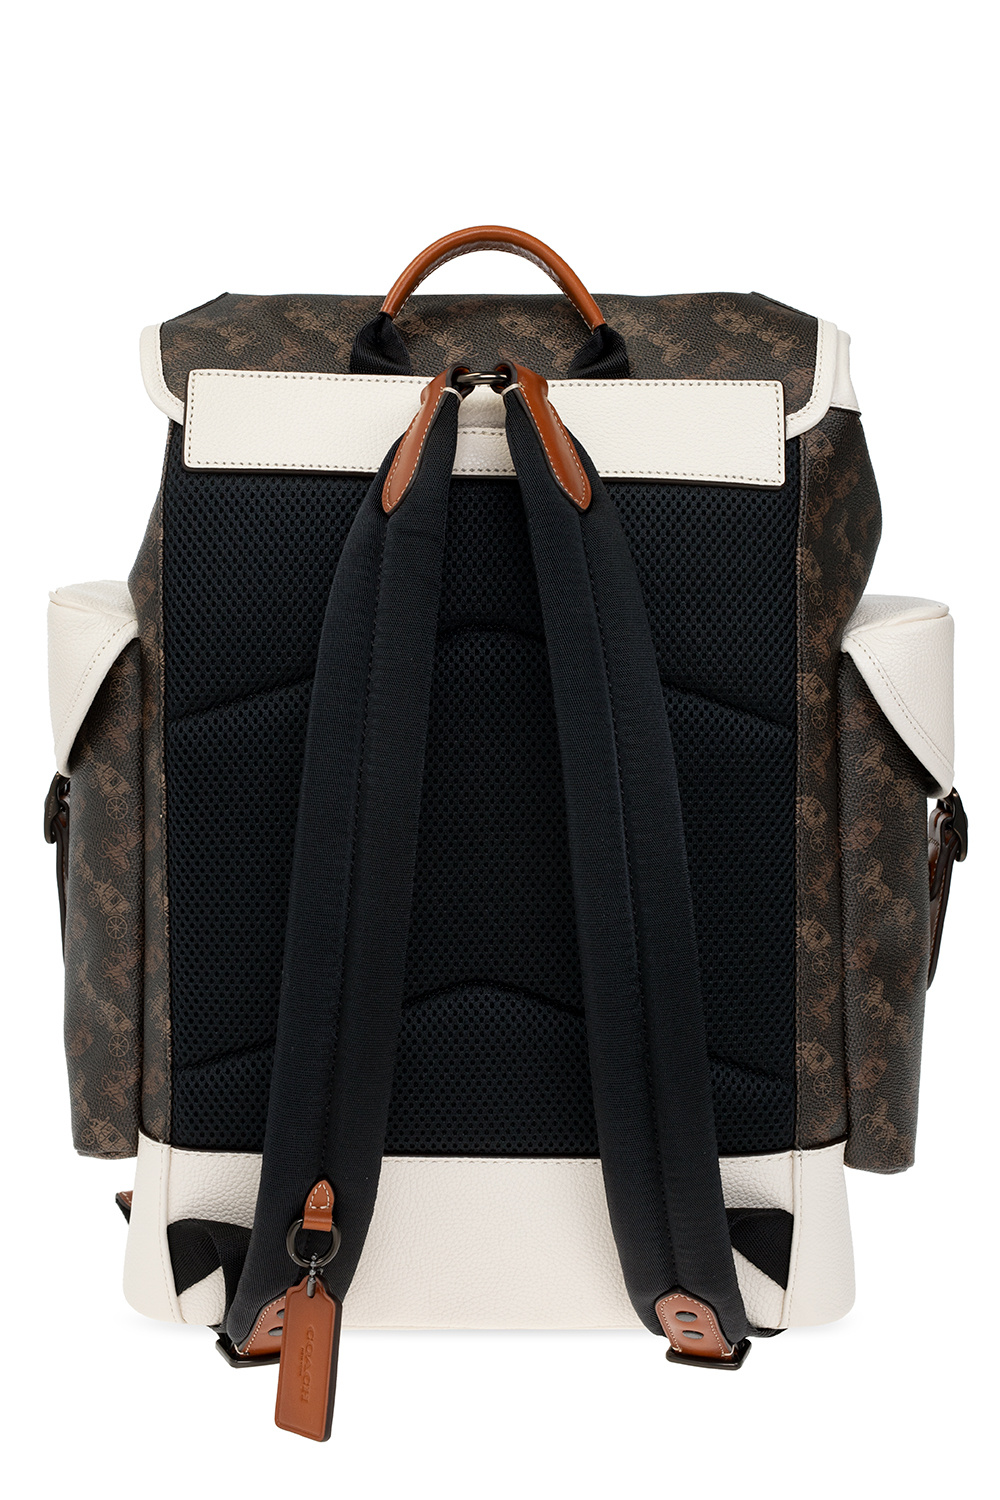 Coach 'Hitch' backpack, Men's Bags